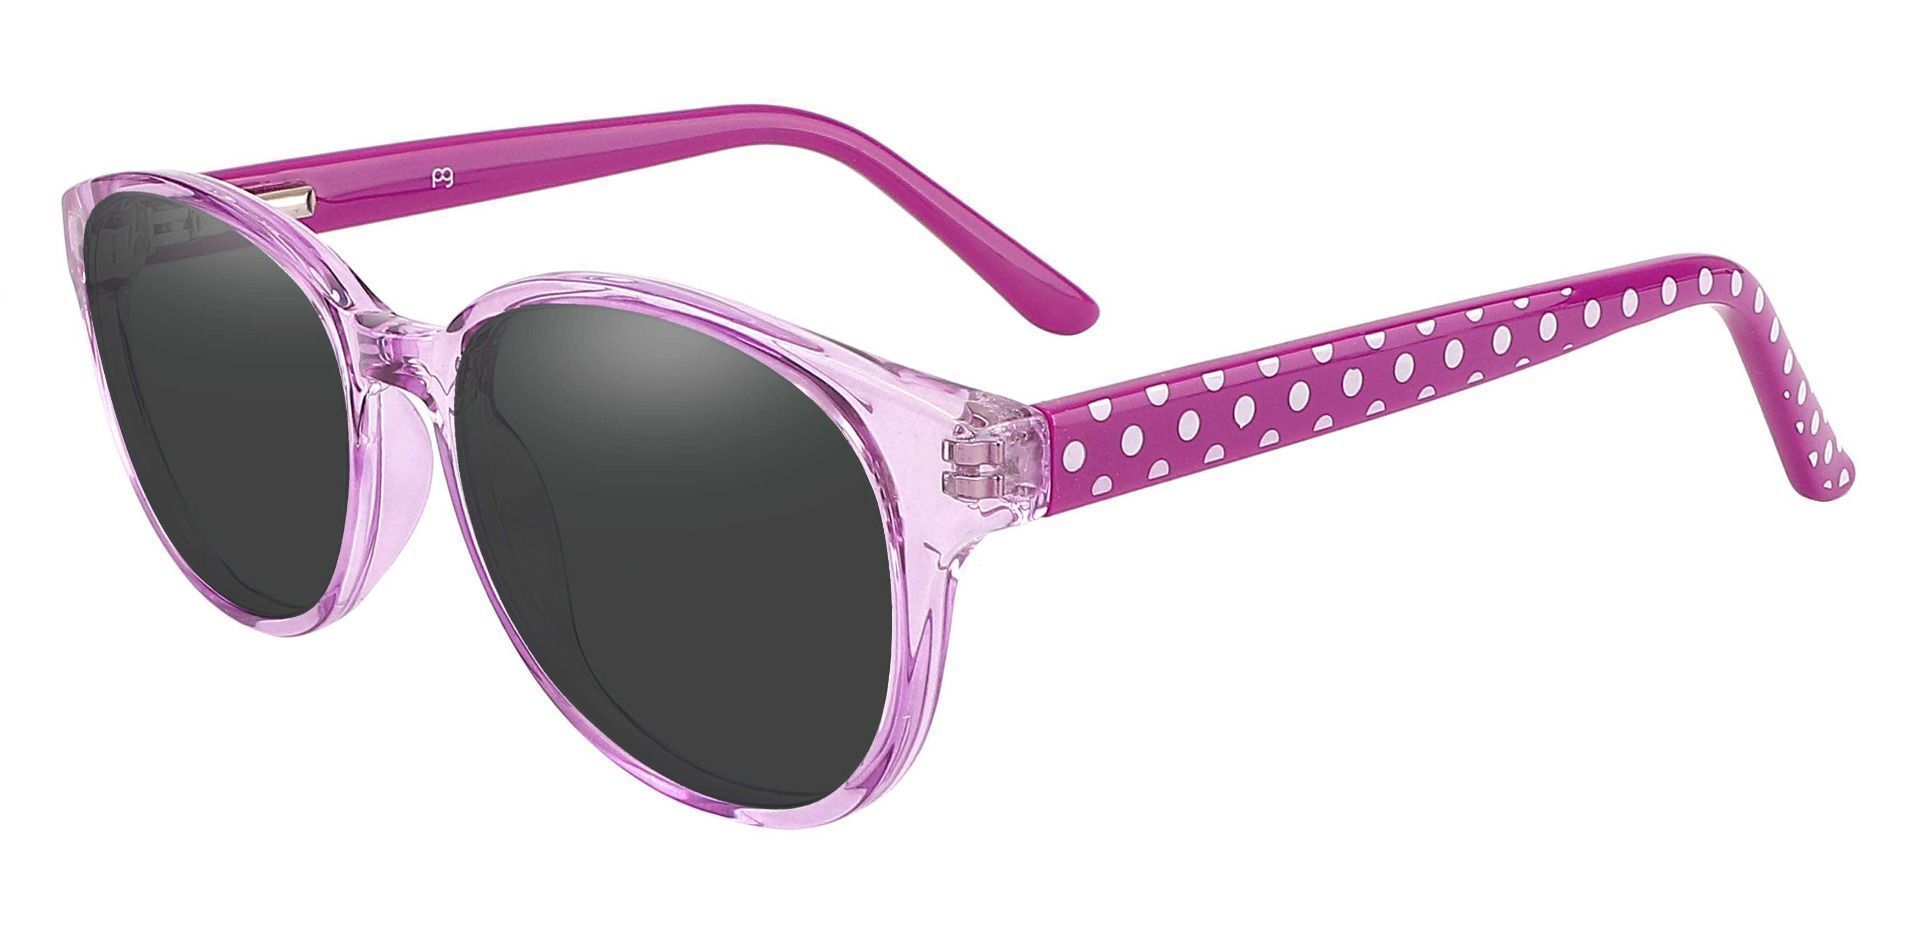 Libby Oval Non-Rx Sunglasses - Purple Frame With Gray Lenses